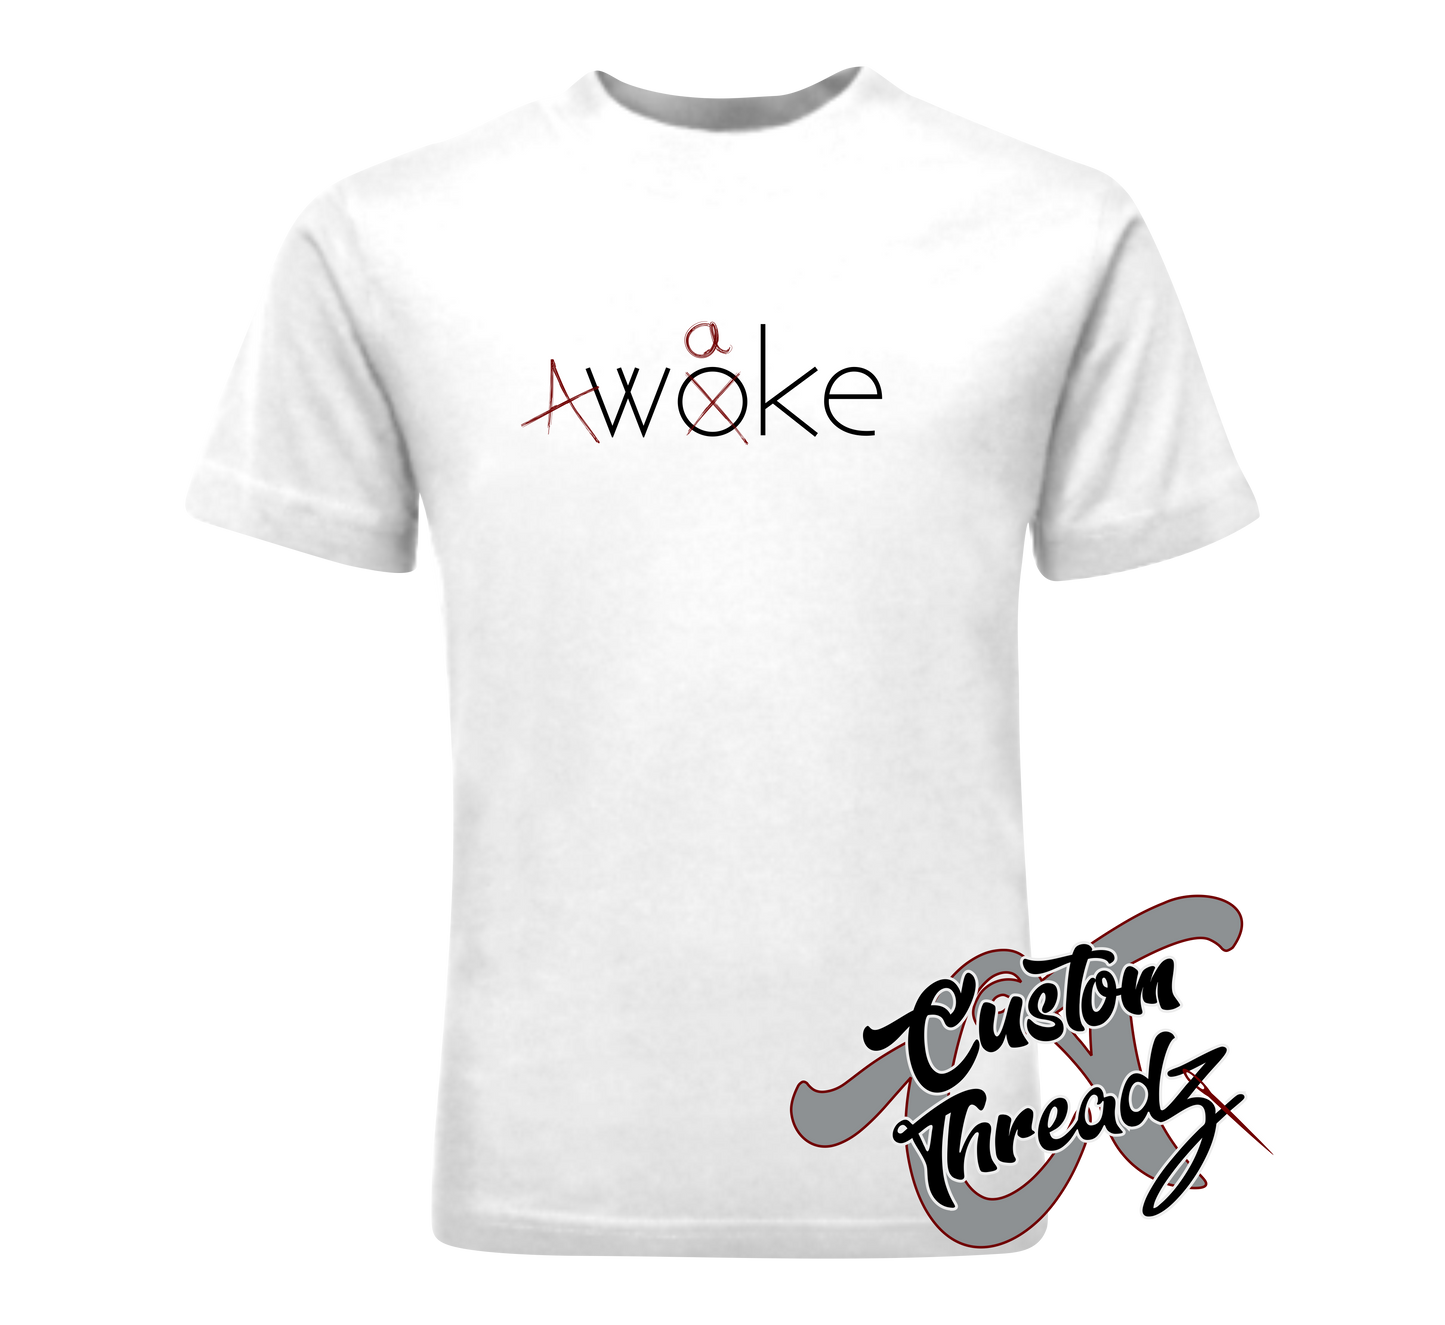 white t-shirt with A-Woke DTG printed design